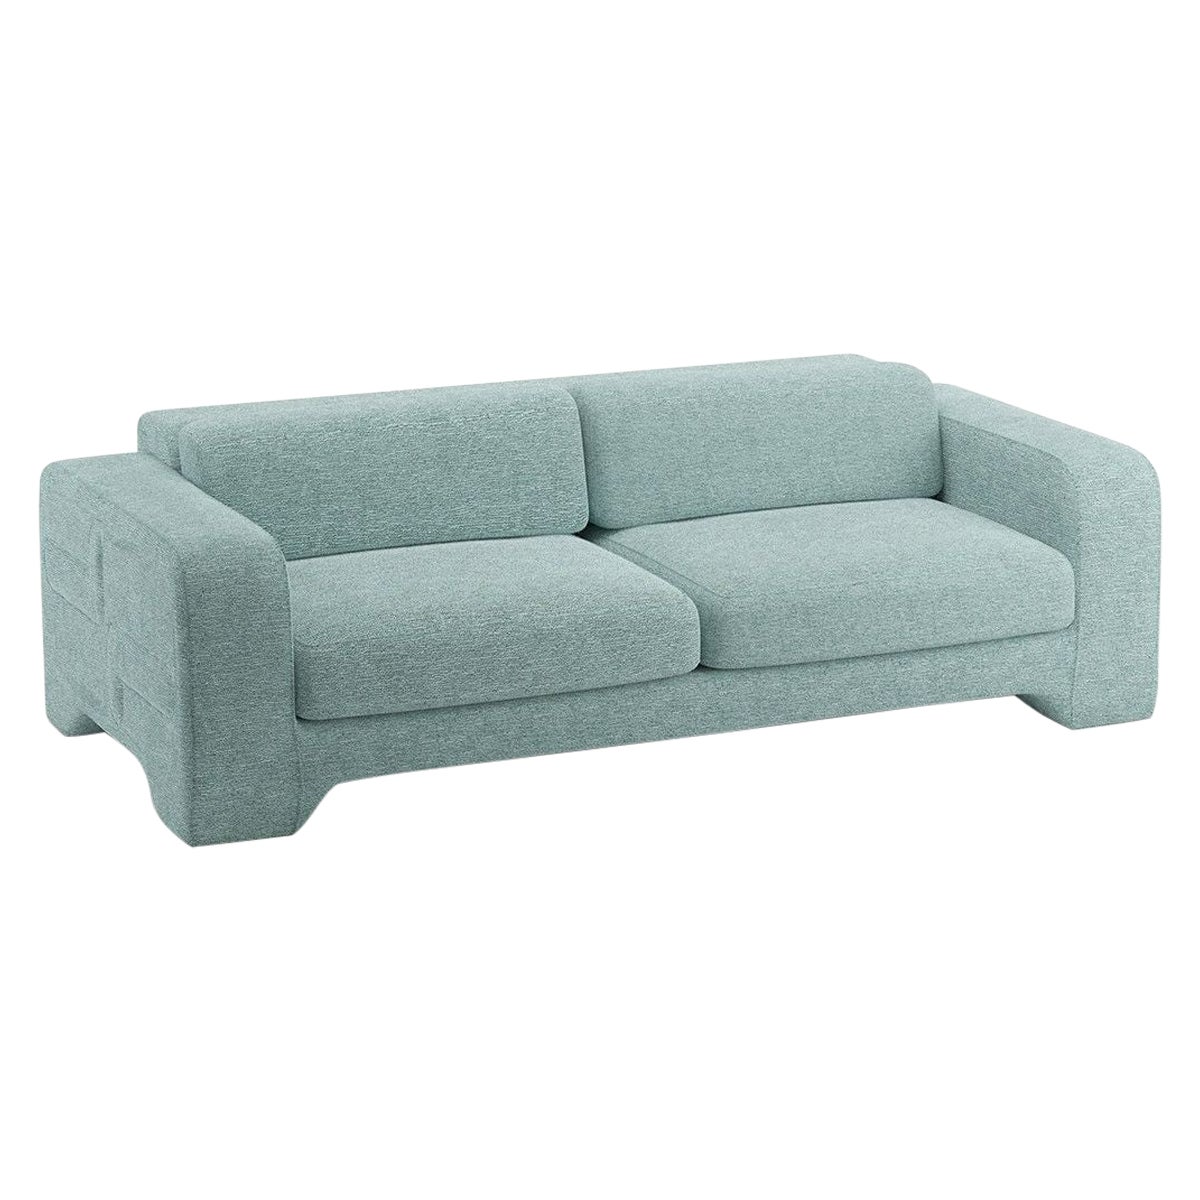 Popus Editions Giovanna 3 Seater Sofa in Mint Megeve Fabric with a Knit Effect For Sale